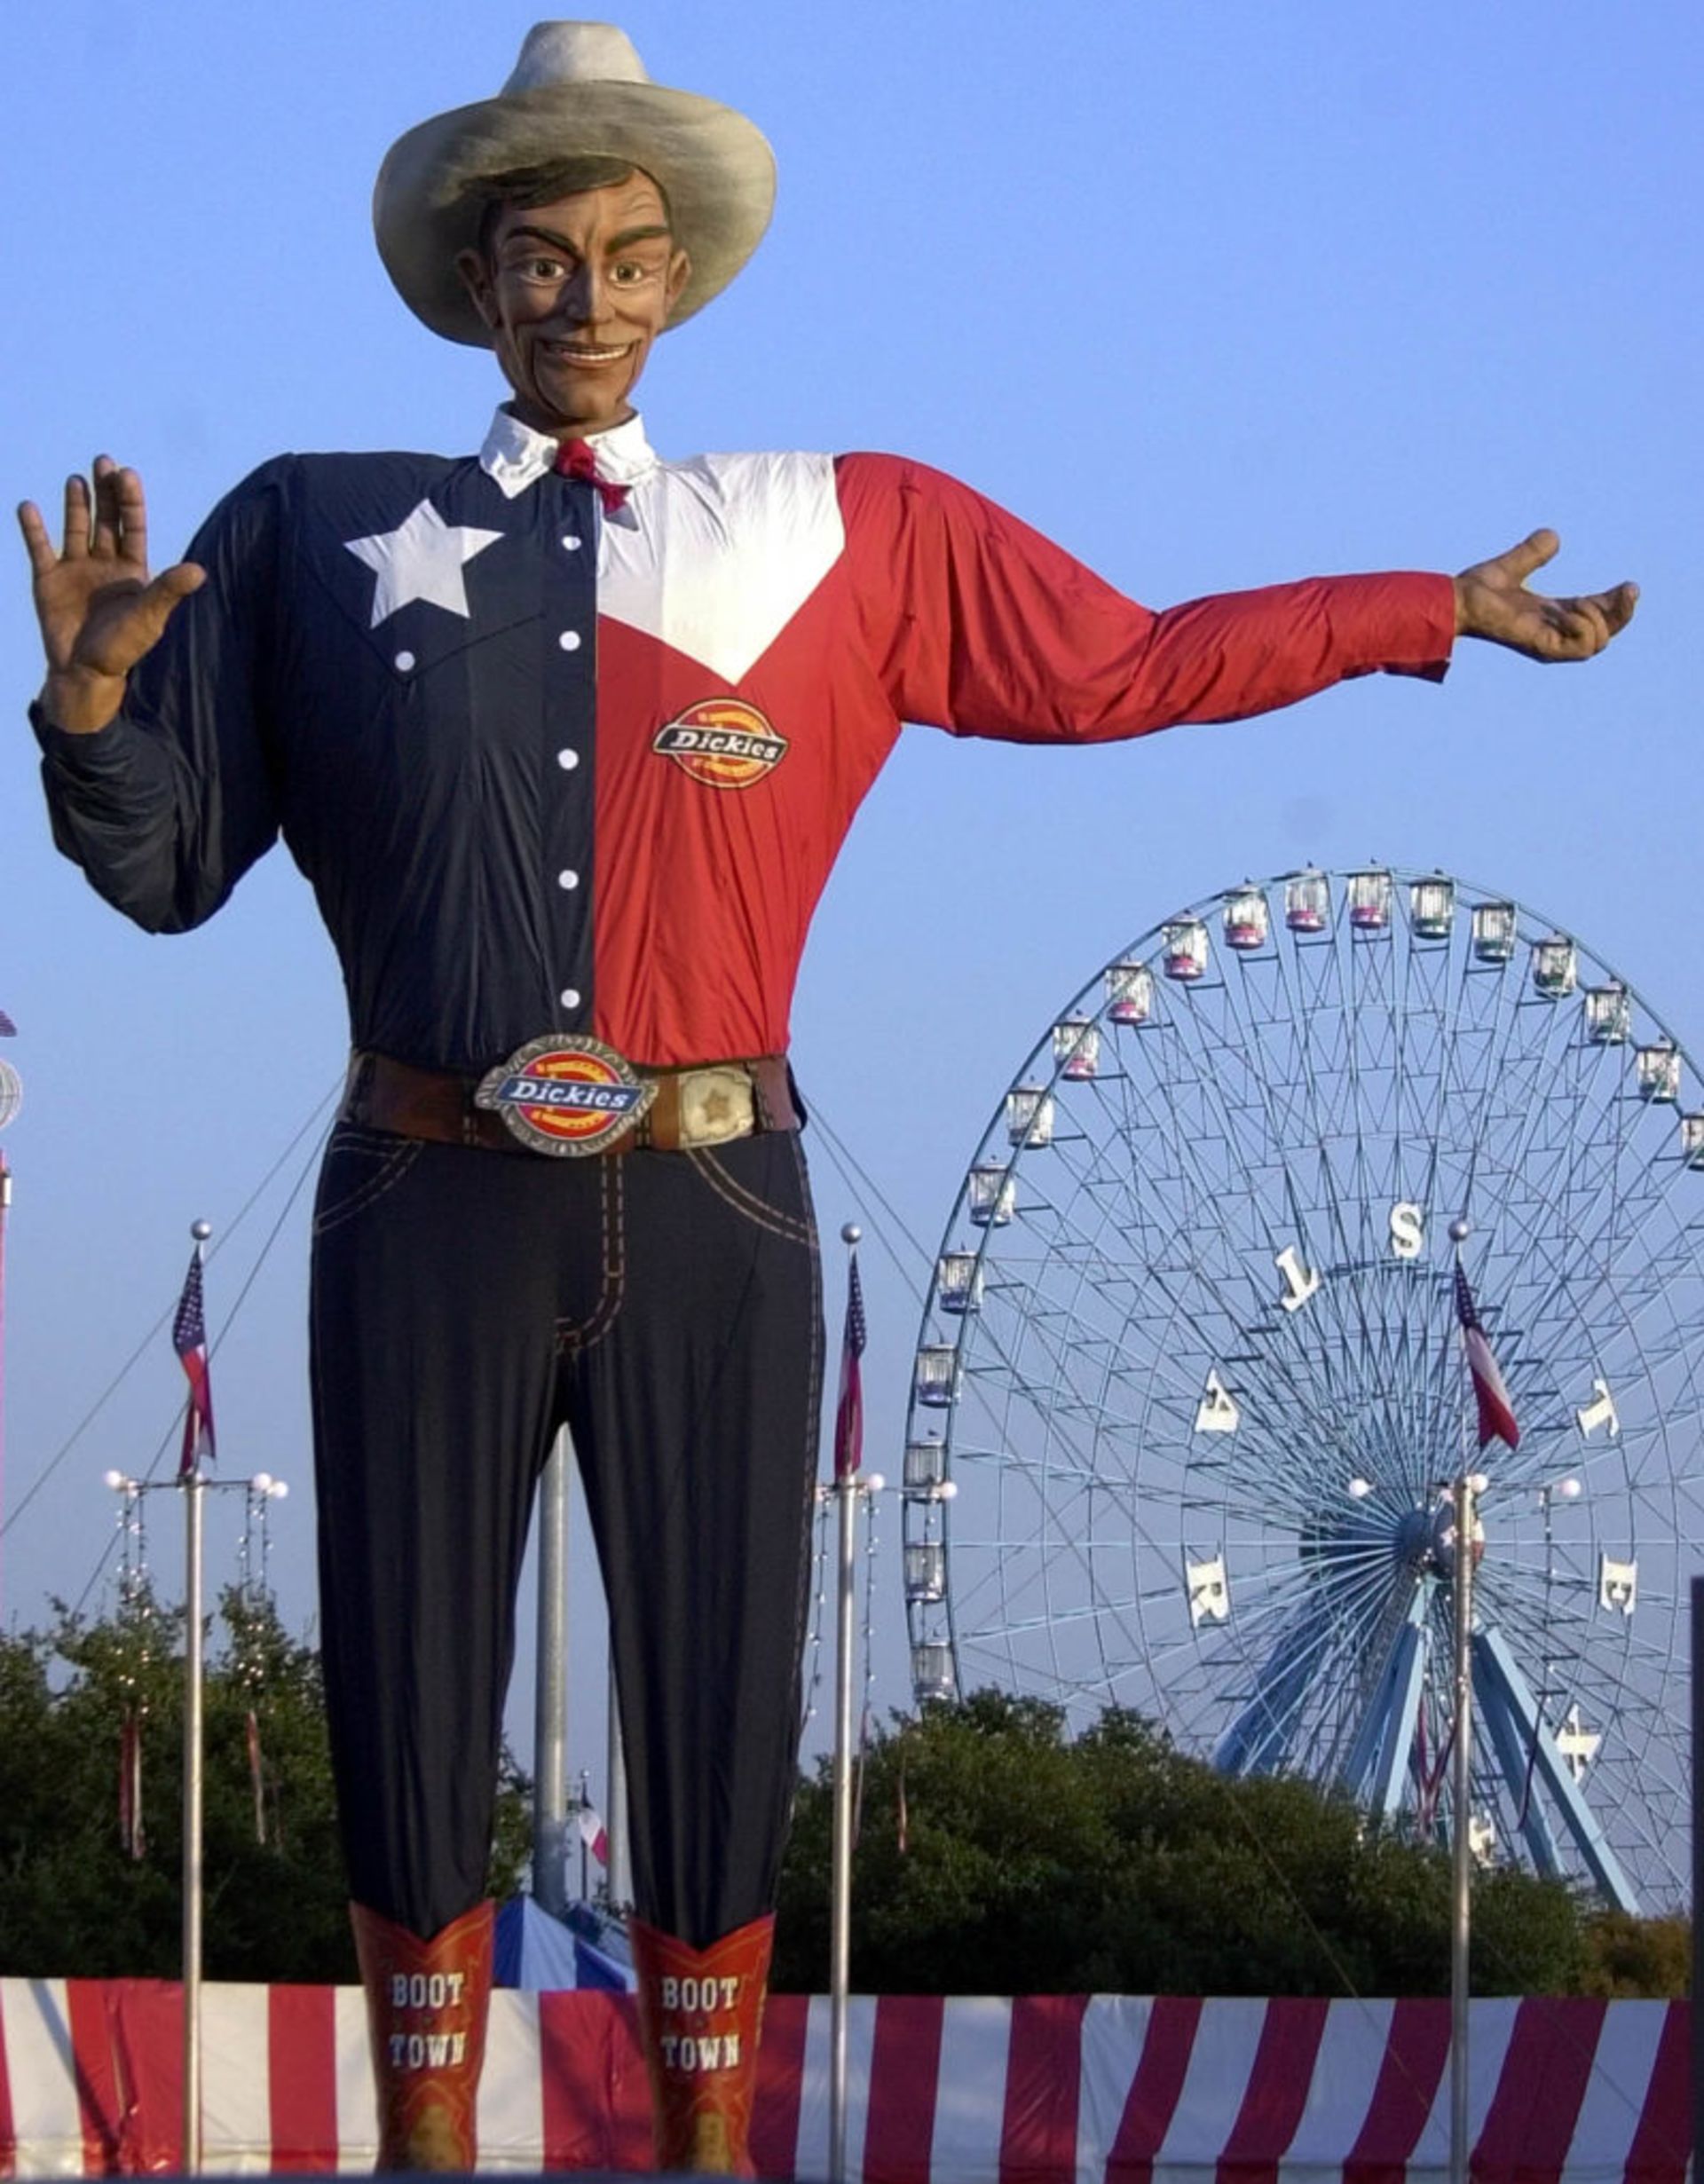 State Fair of Texas Time!